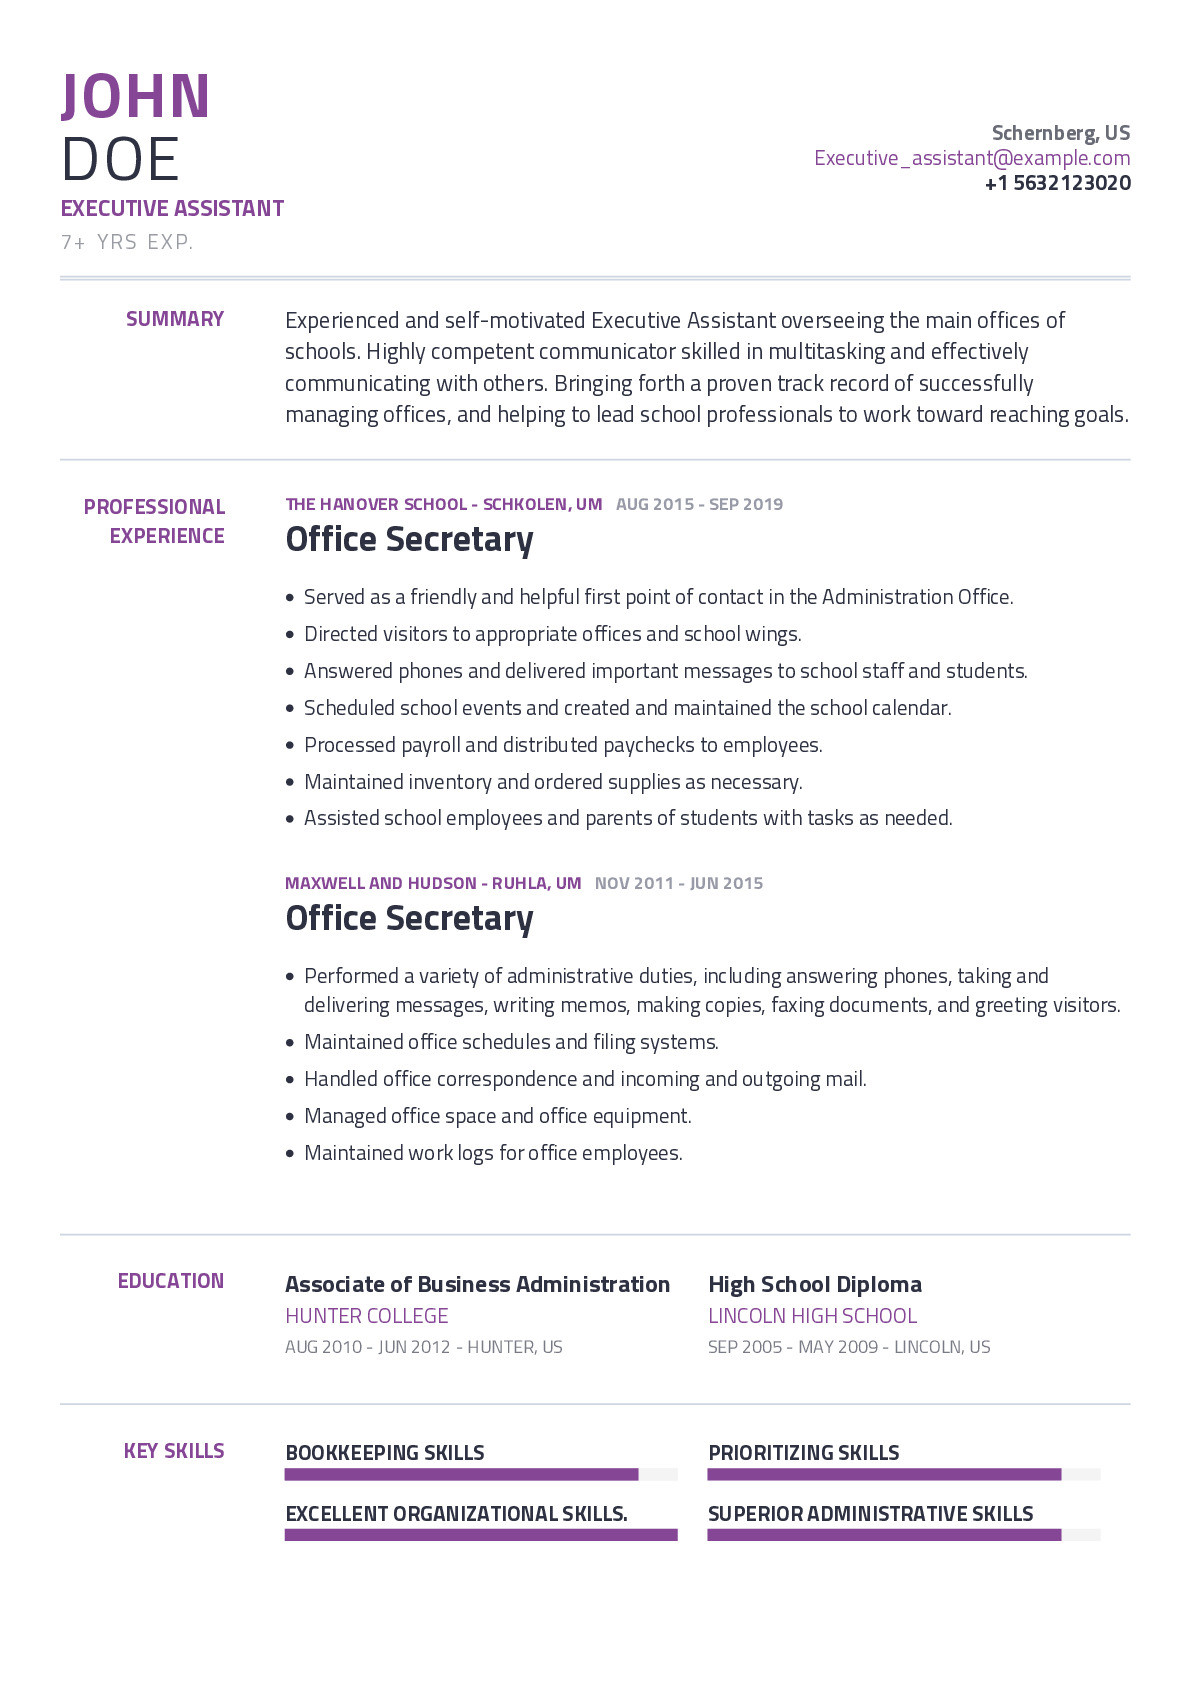 Sample Resume for Executive assistant and Multitasking Executive assistant Resume Example with Content Sample Craftmycv